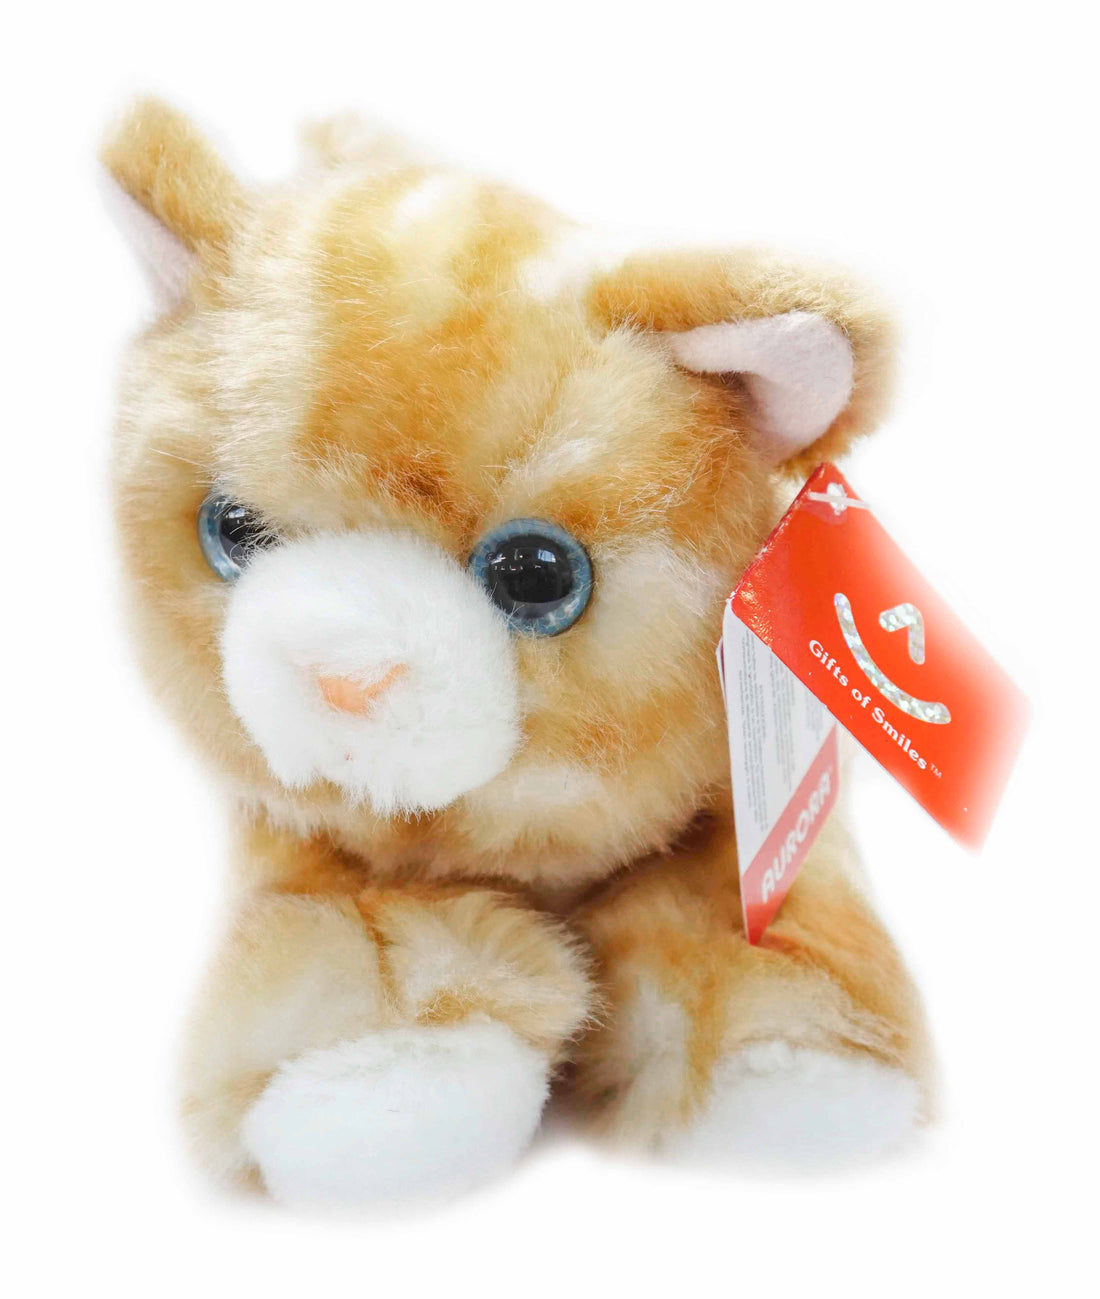 Tibs The Post Office Cat plush toy